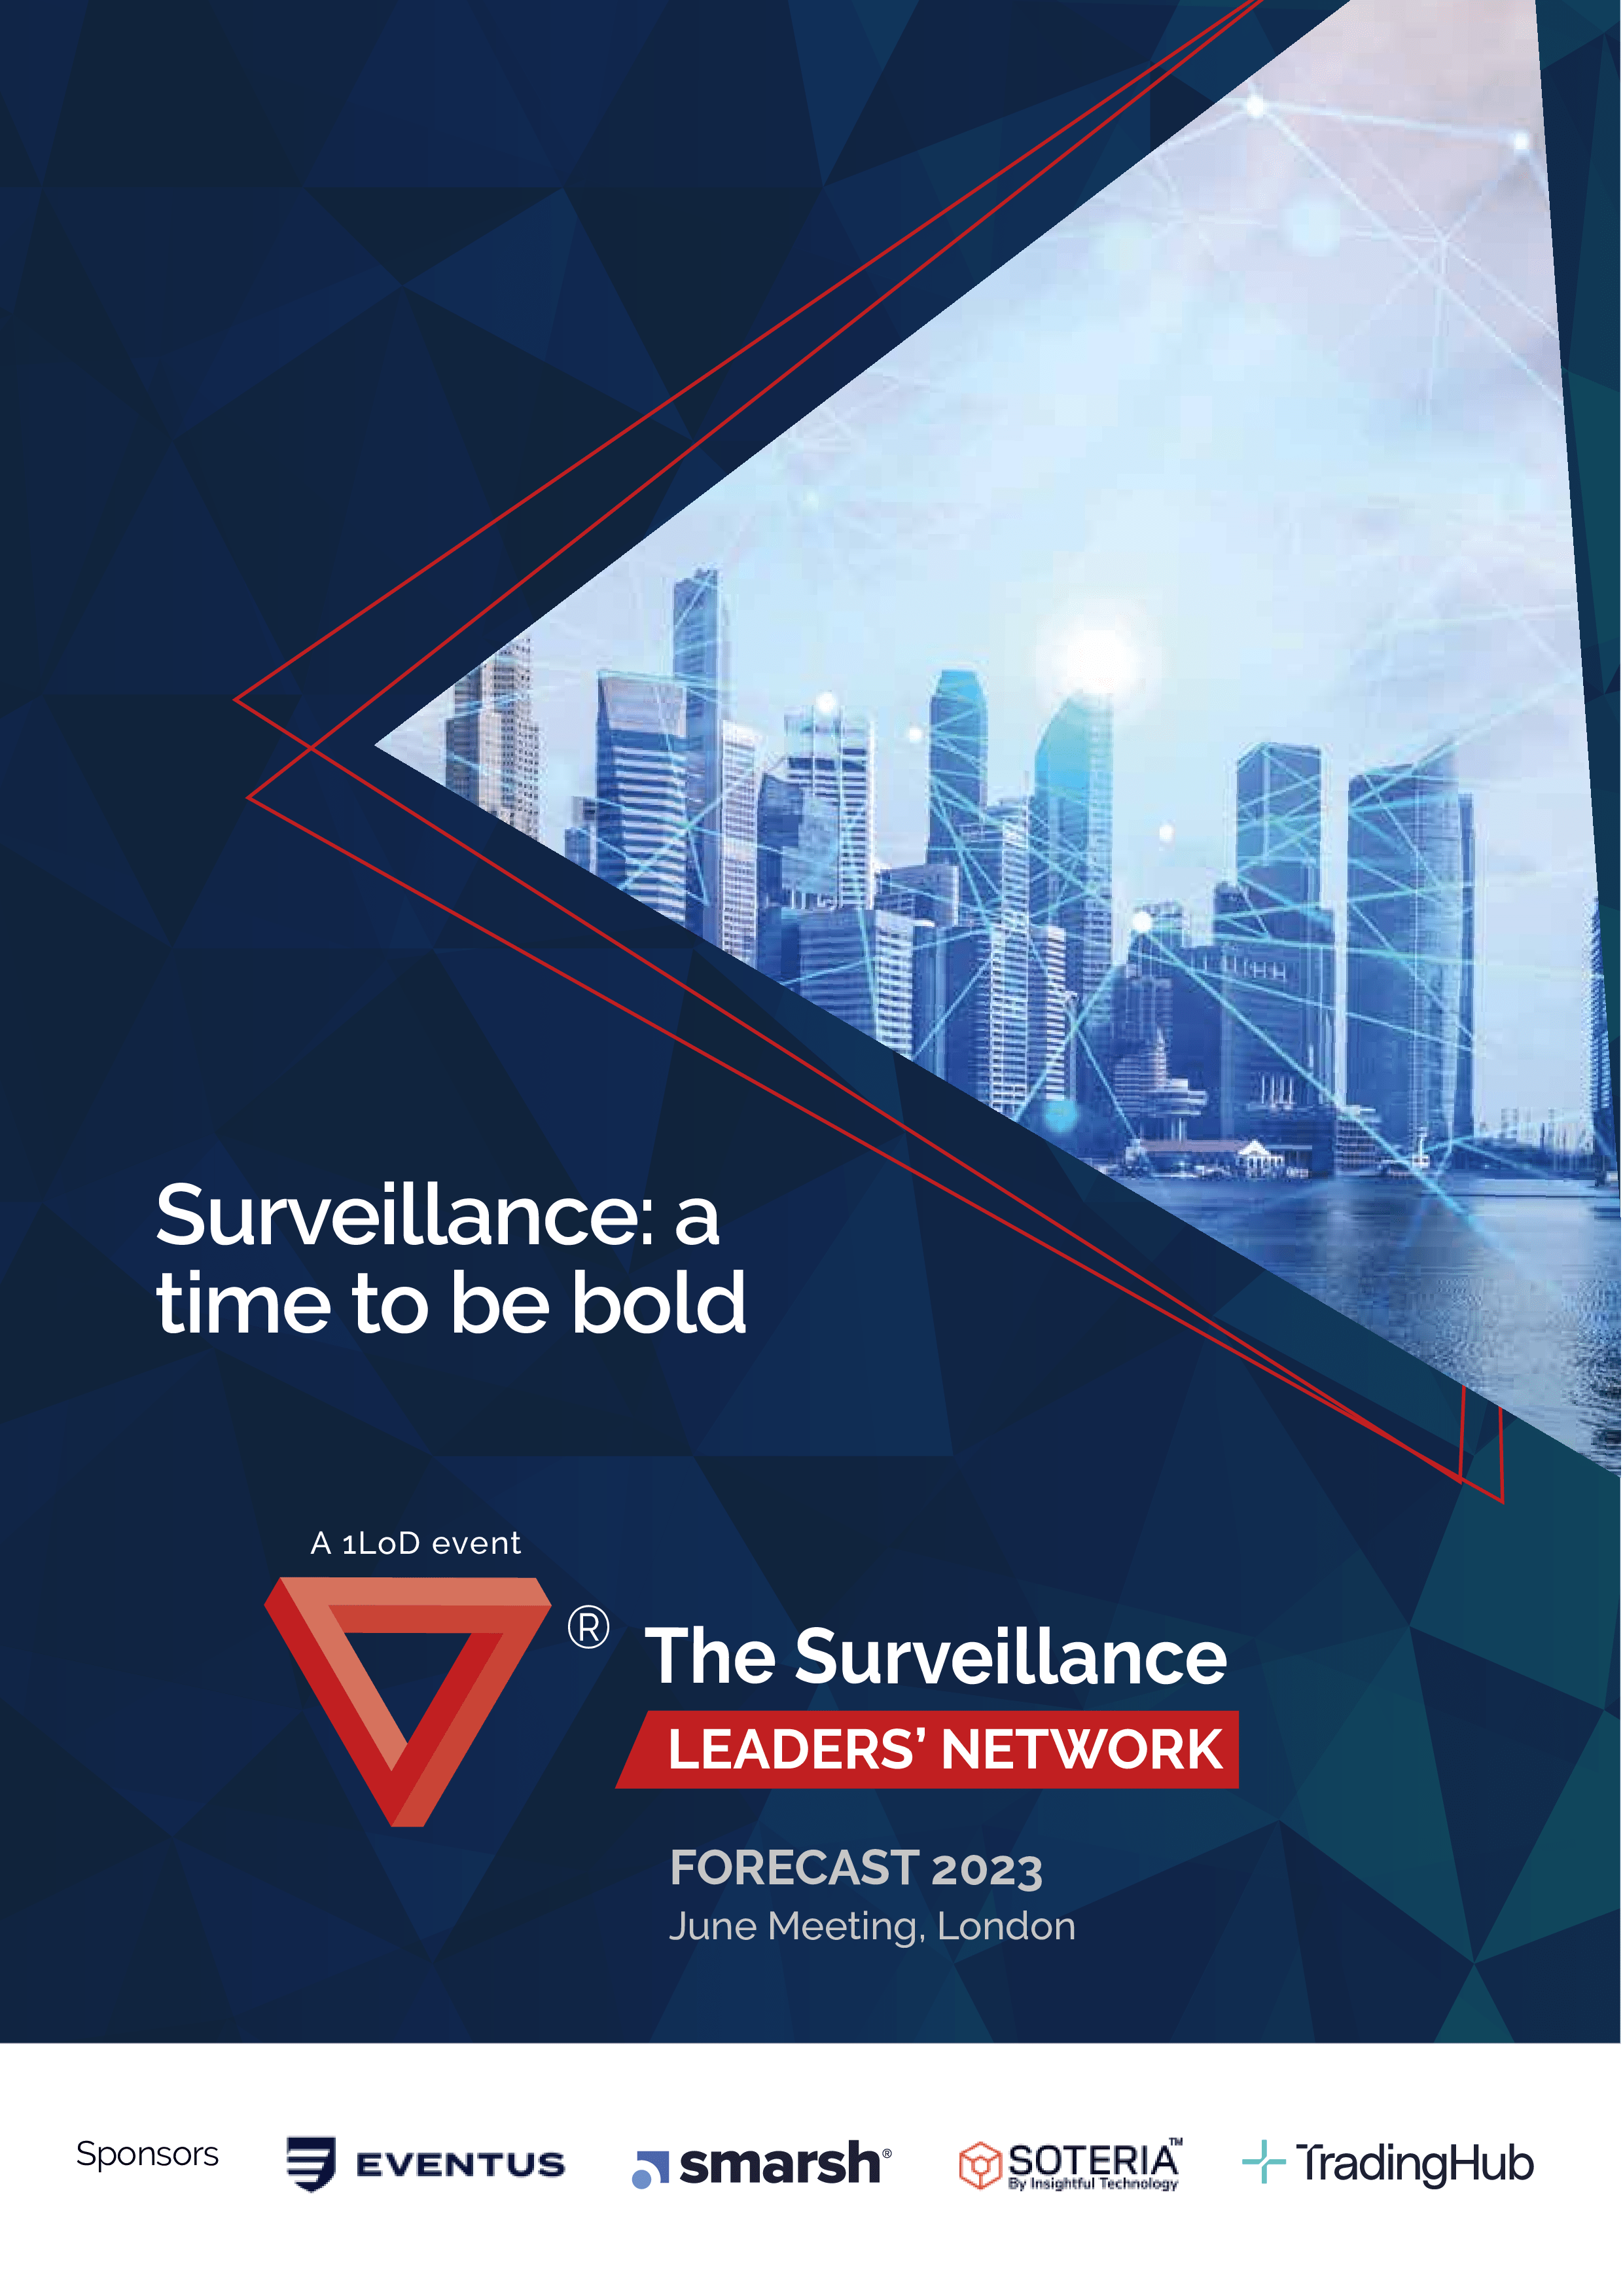 Surveillance: a time to be bold